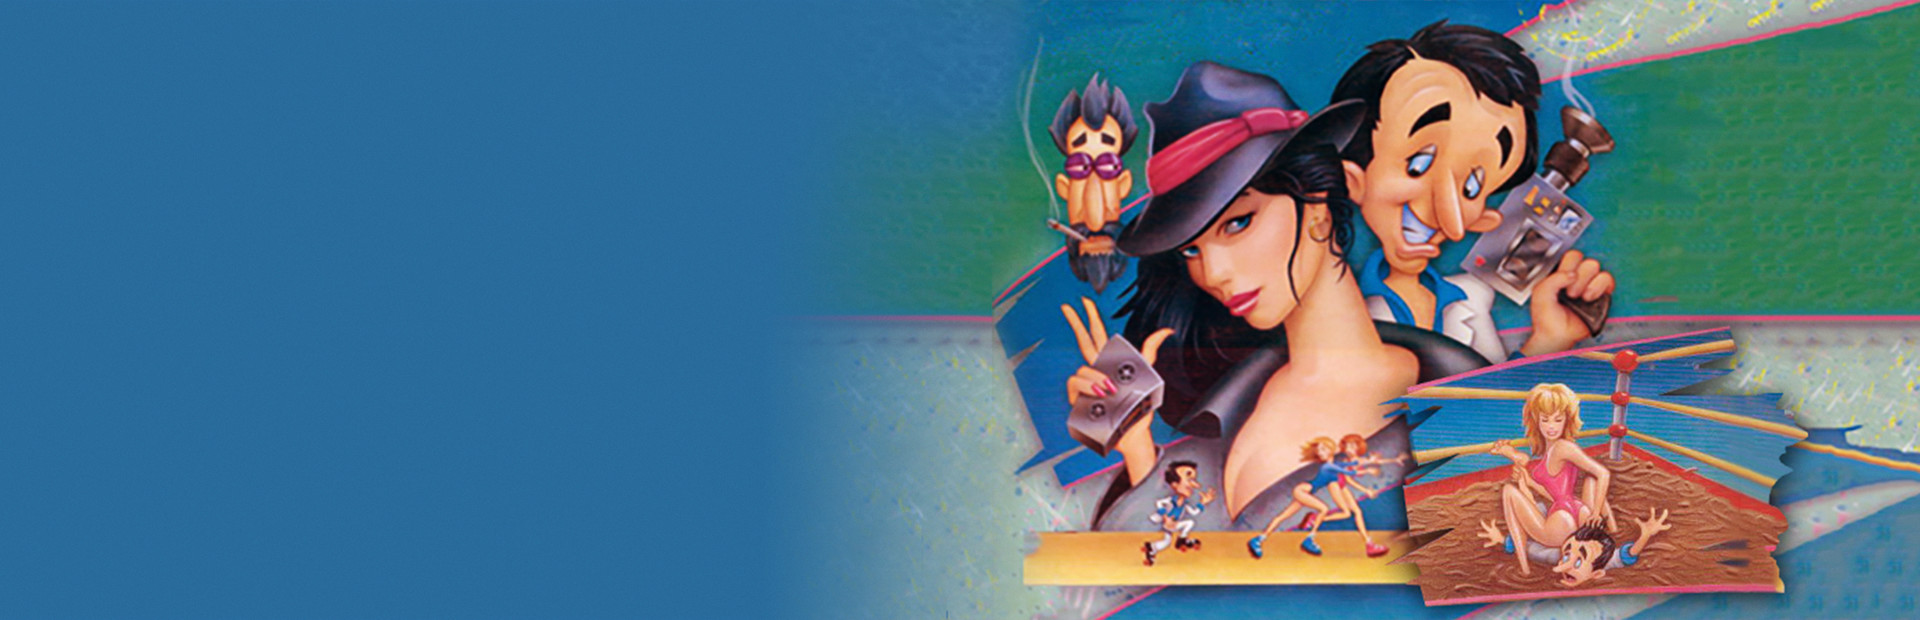 Leisure Suit Larry 5 - Passionate Patti Does a Little Undercover Work cover image